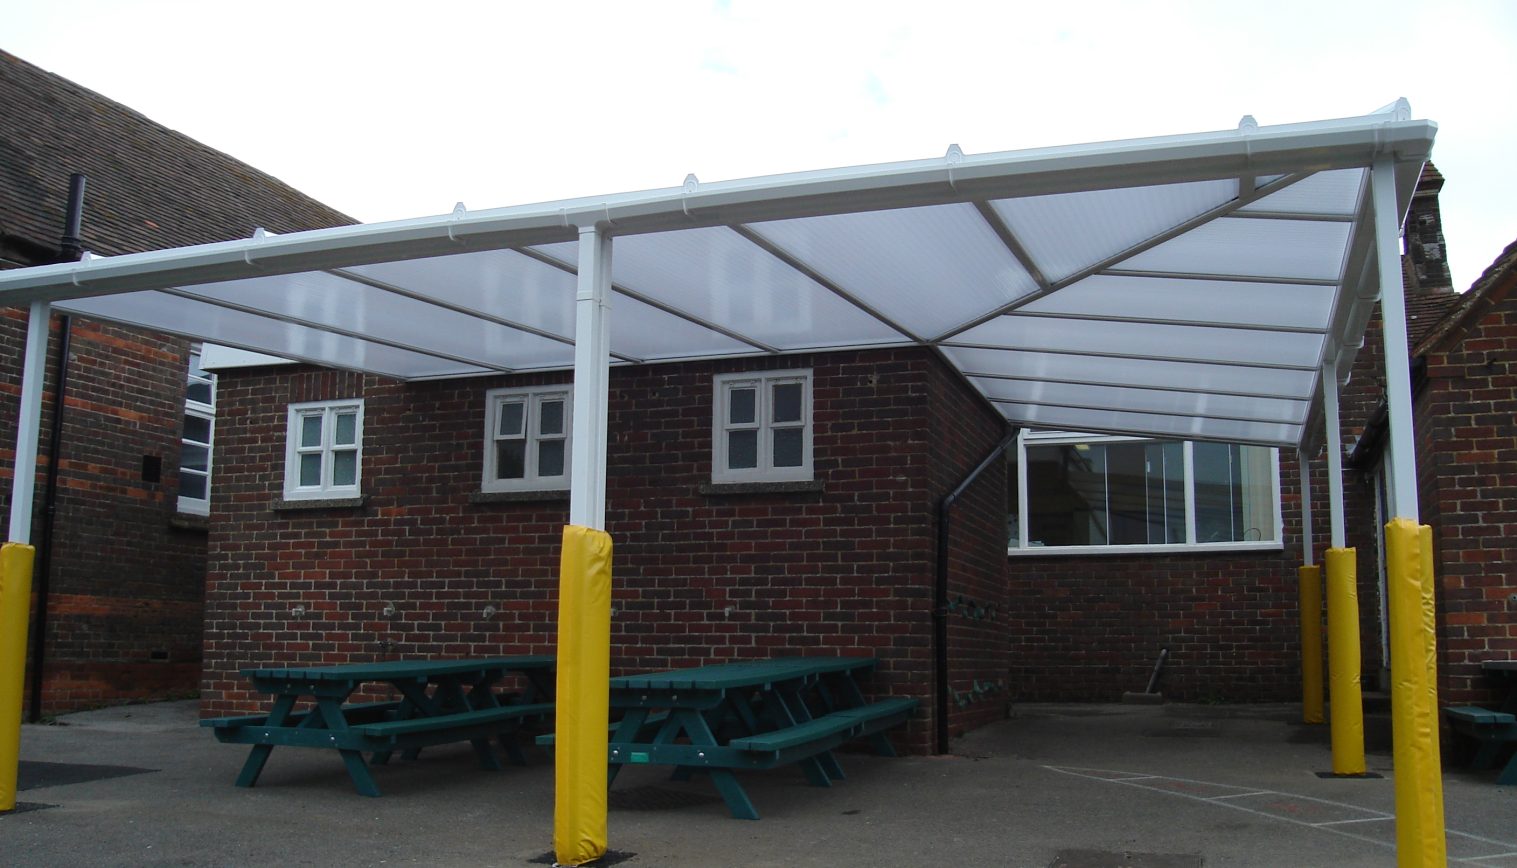 Lee Common C of E School – Wall Mounted Canopy